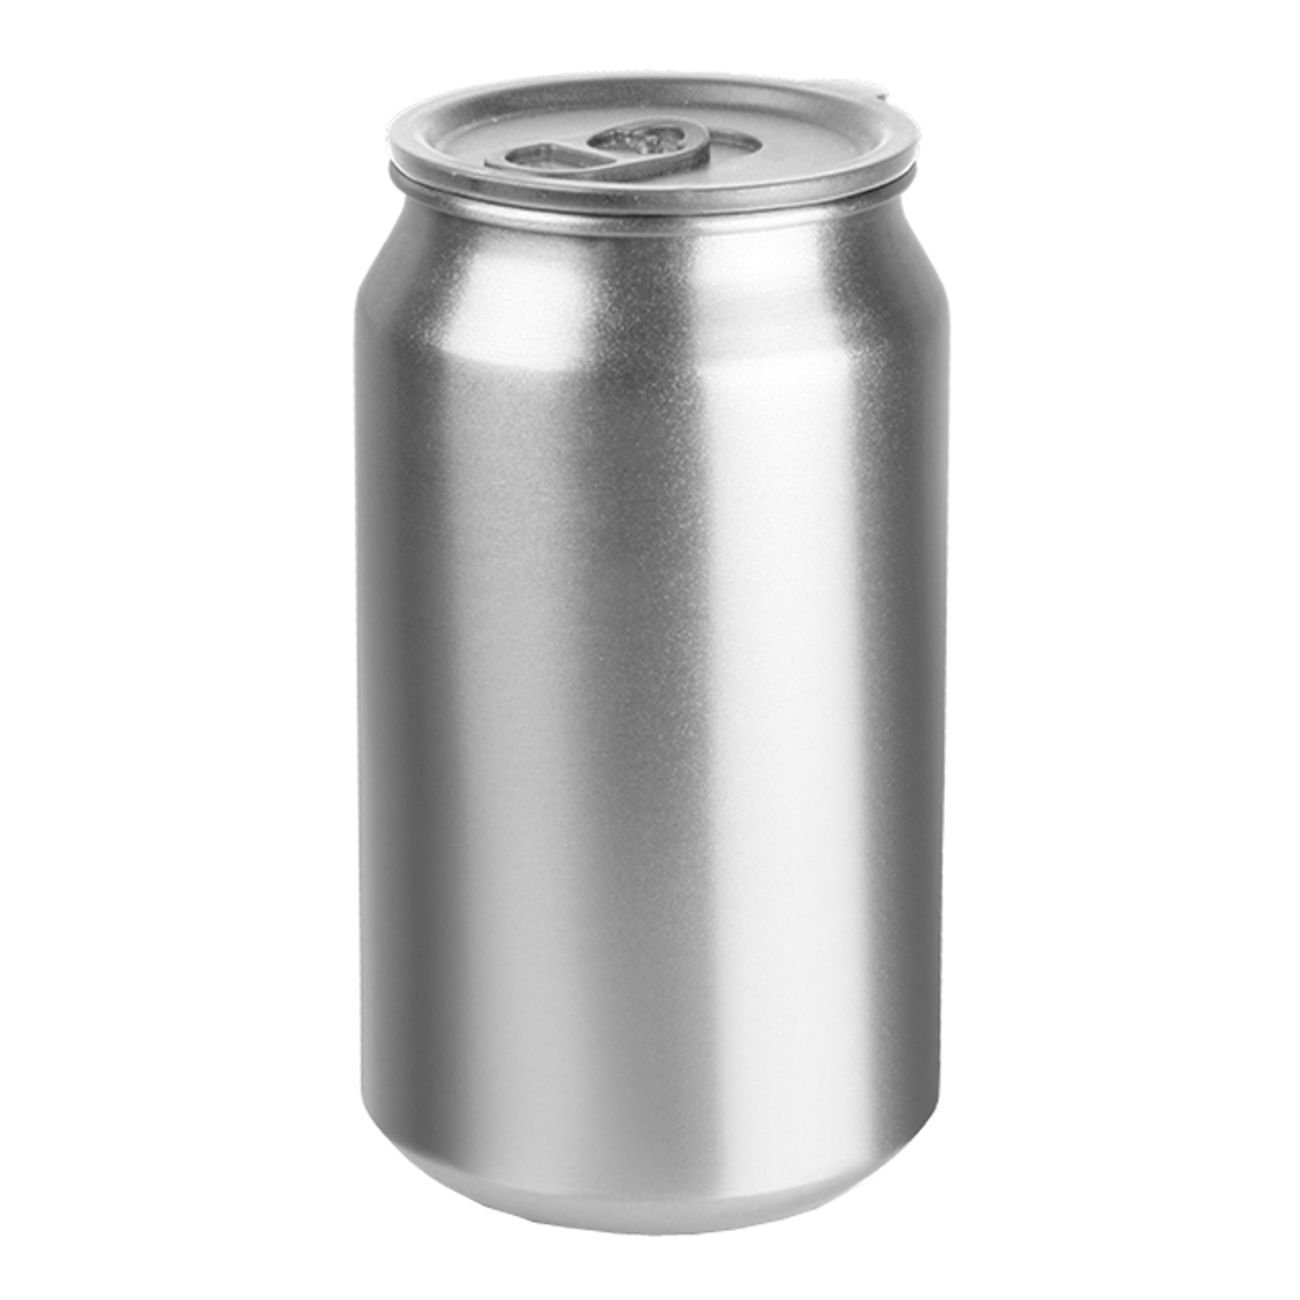 aluminium-drinks-can-cup-with-lid-1